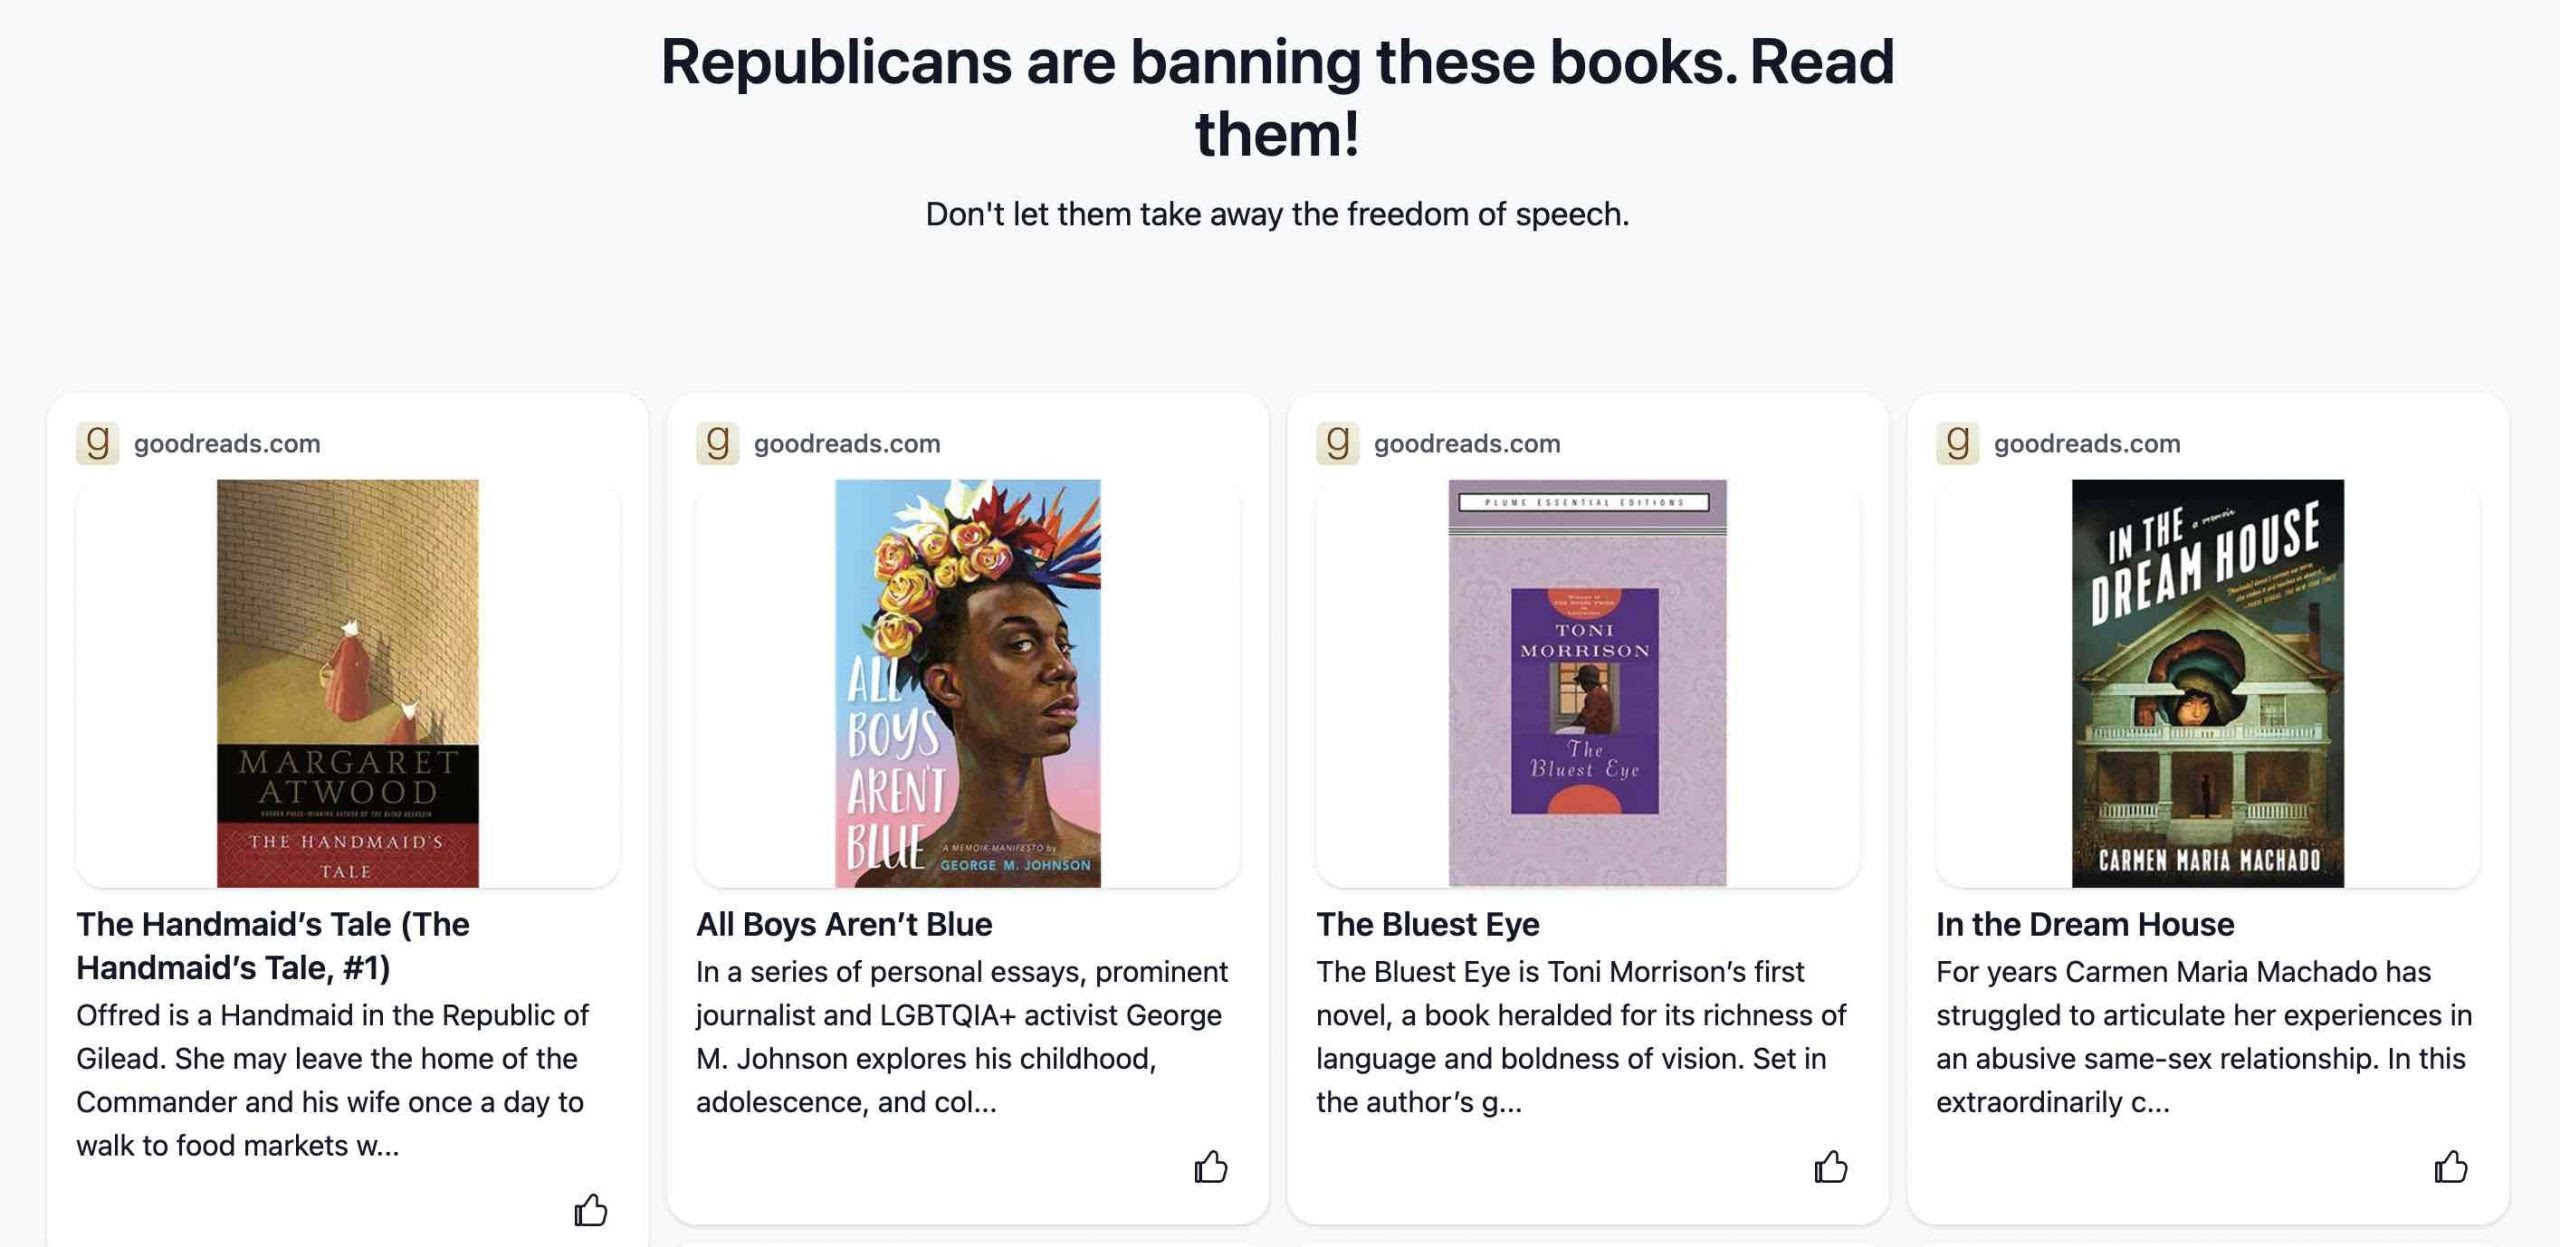 "... hundreds of residents have petitioned for the school board to reverse its ban on Julie Otsuka’s book. They might want to cite the recent words LeVar Burton, beloved host of “Reading Rainbow”: “Read the books they’re banning. That’s where the good stuff is. If they don’t want you to read it, there’s a reason why.” - LA Times